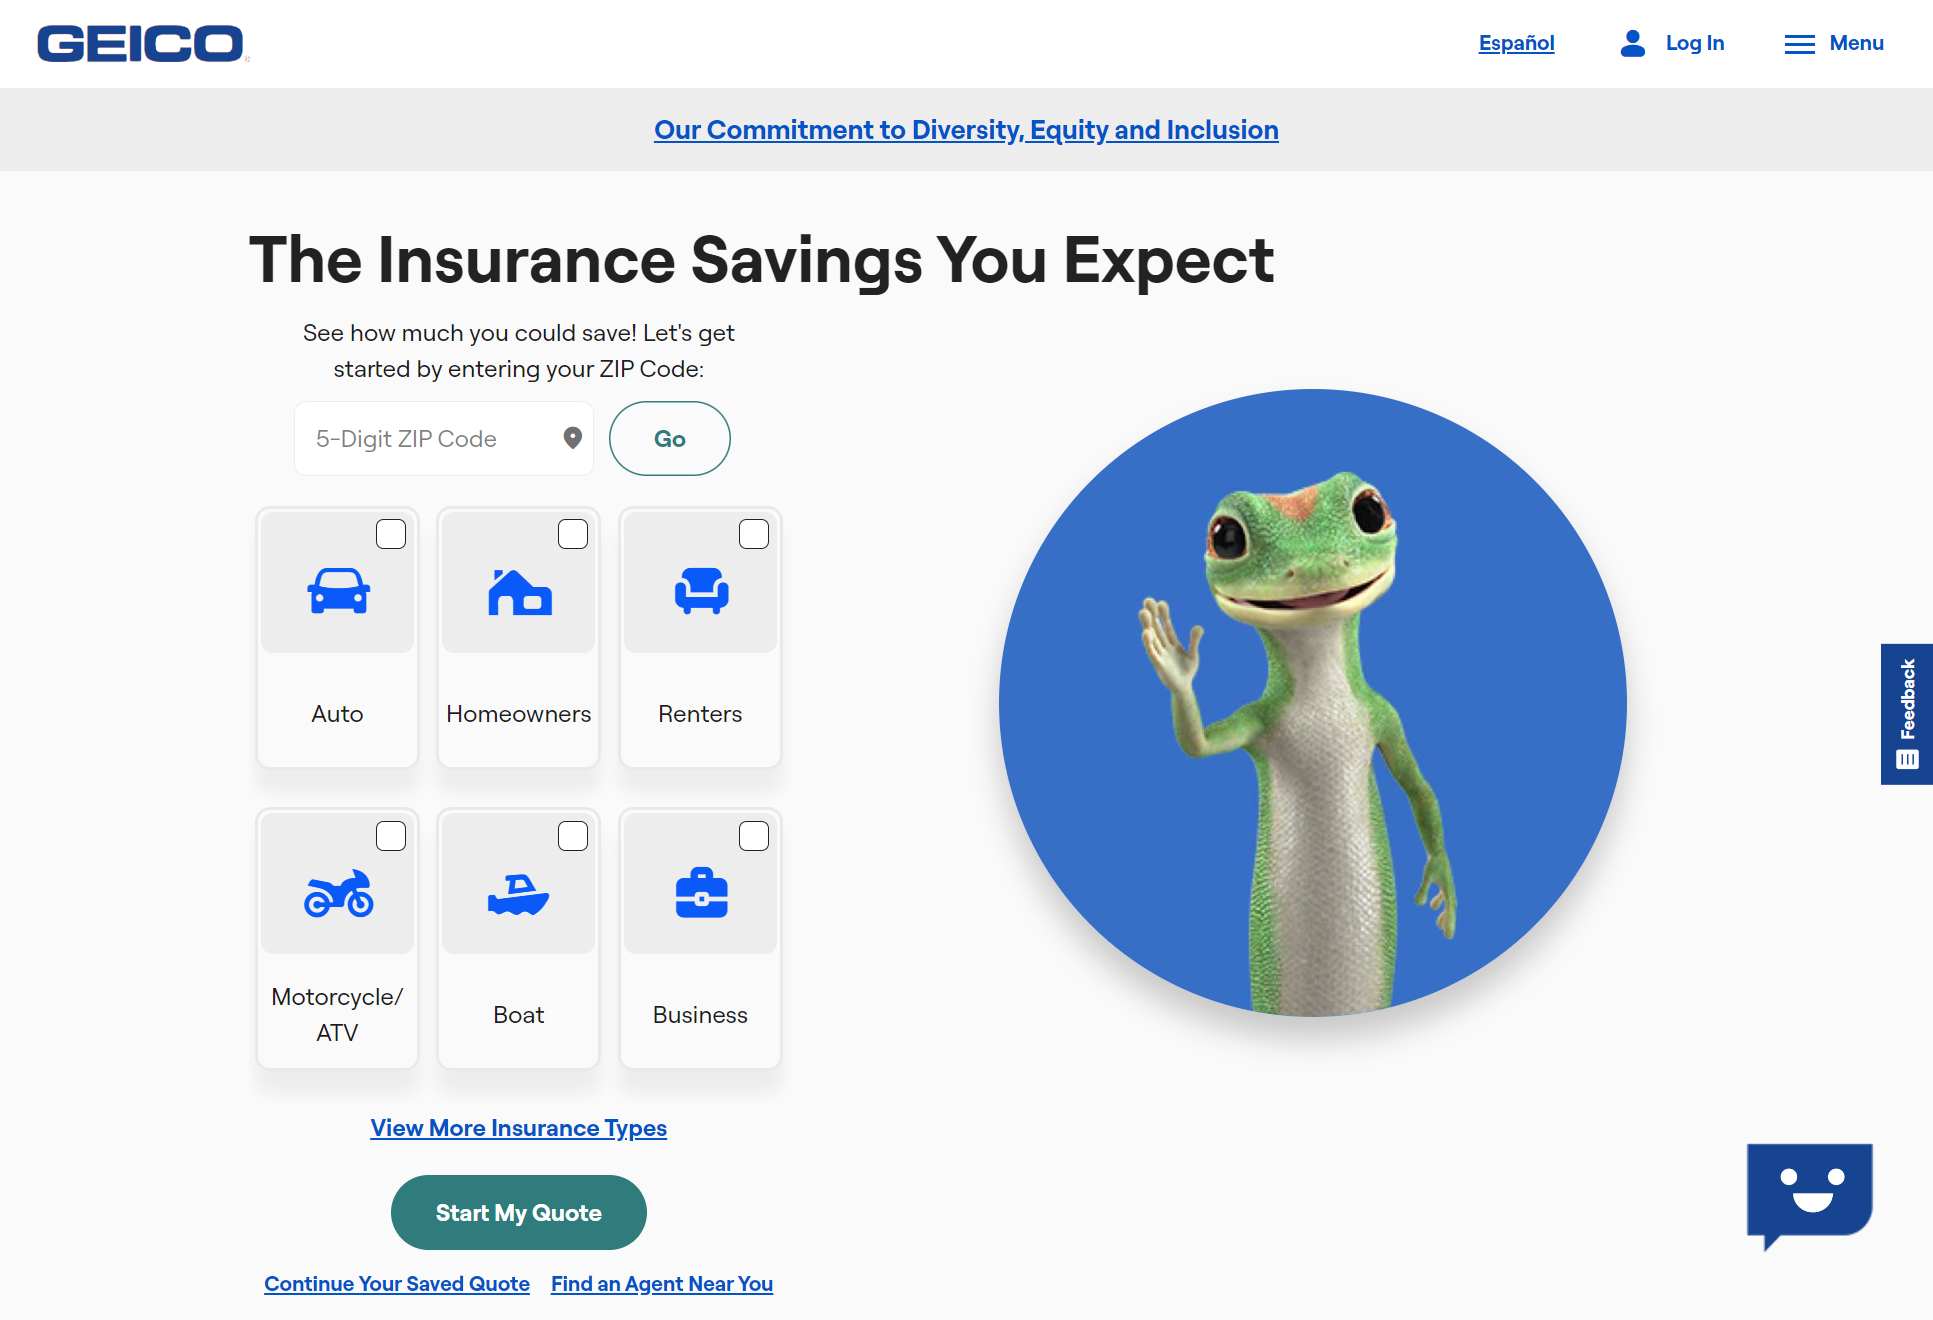 geico homepage: Best Auto Insurance for Luxury Cars